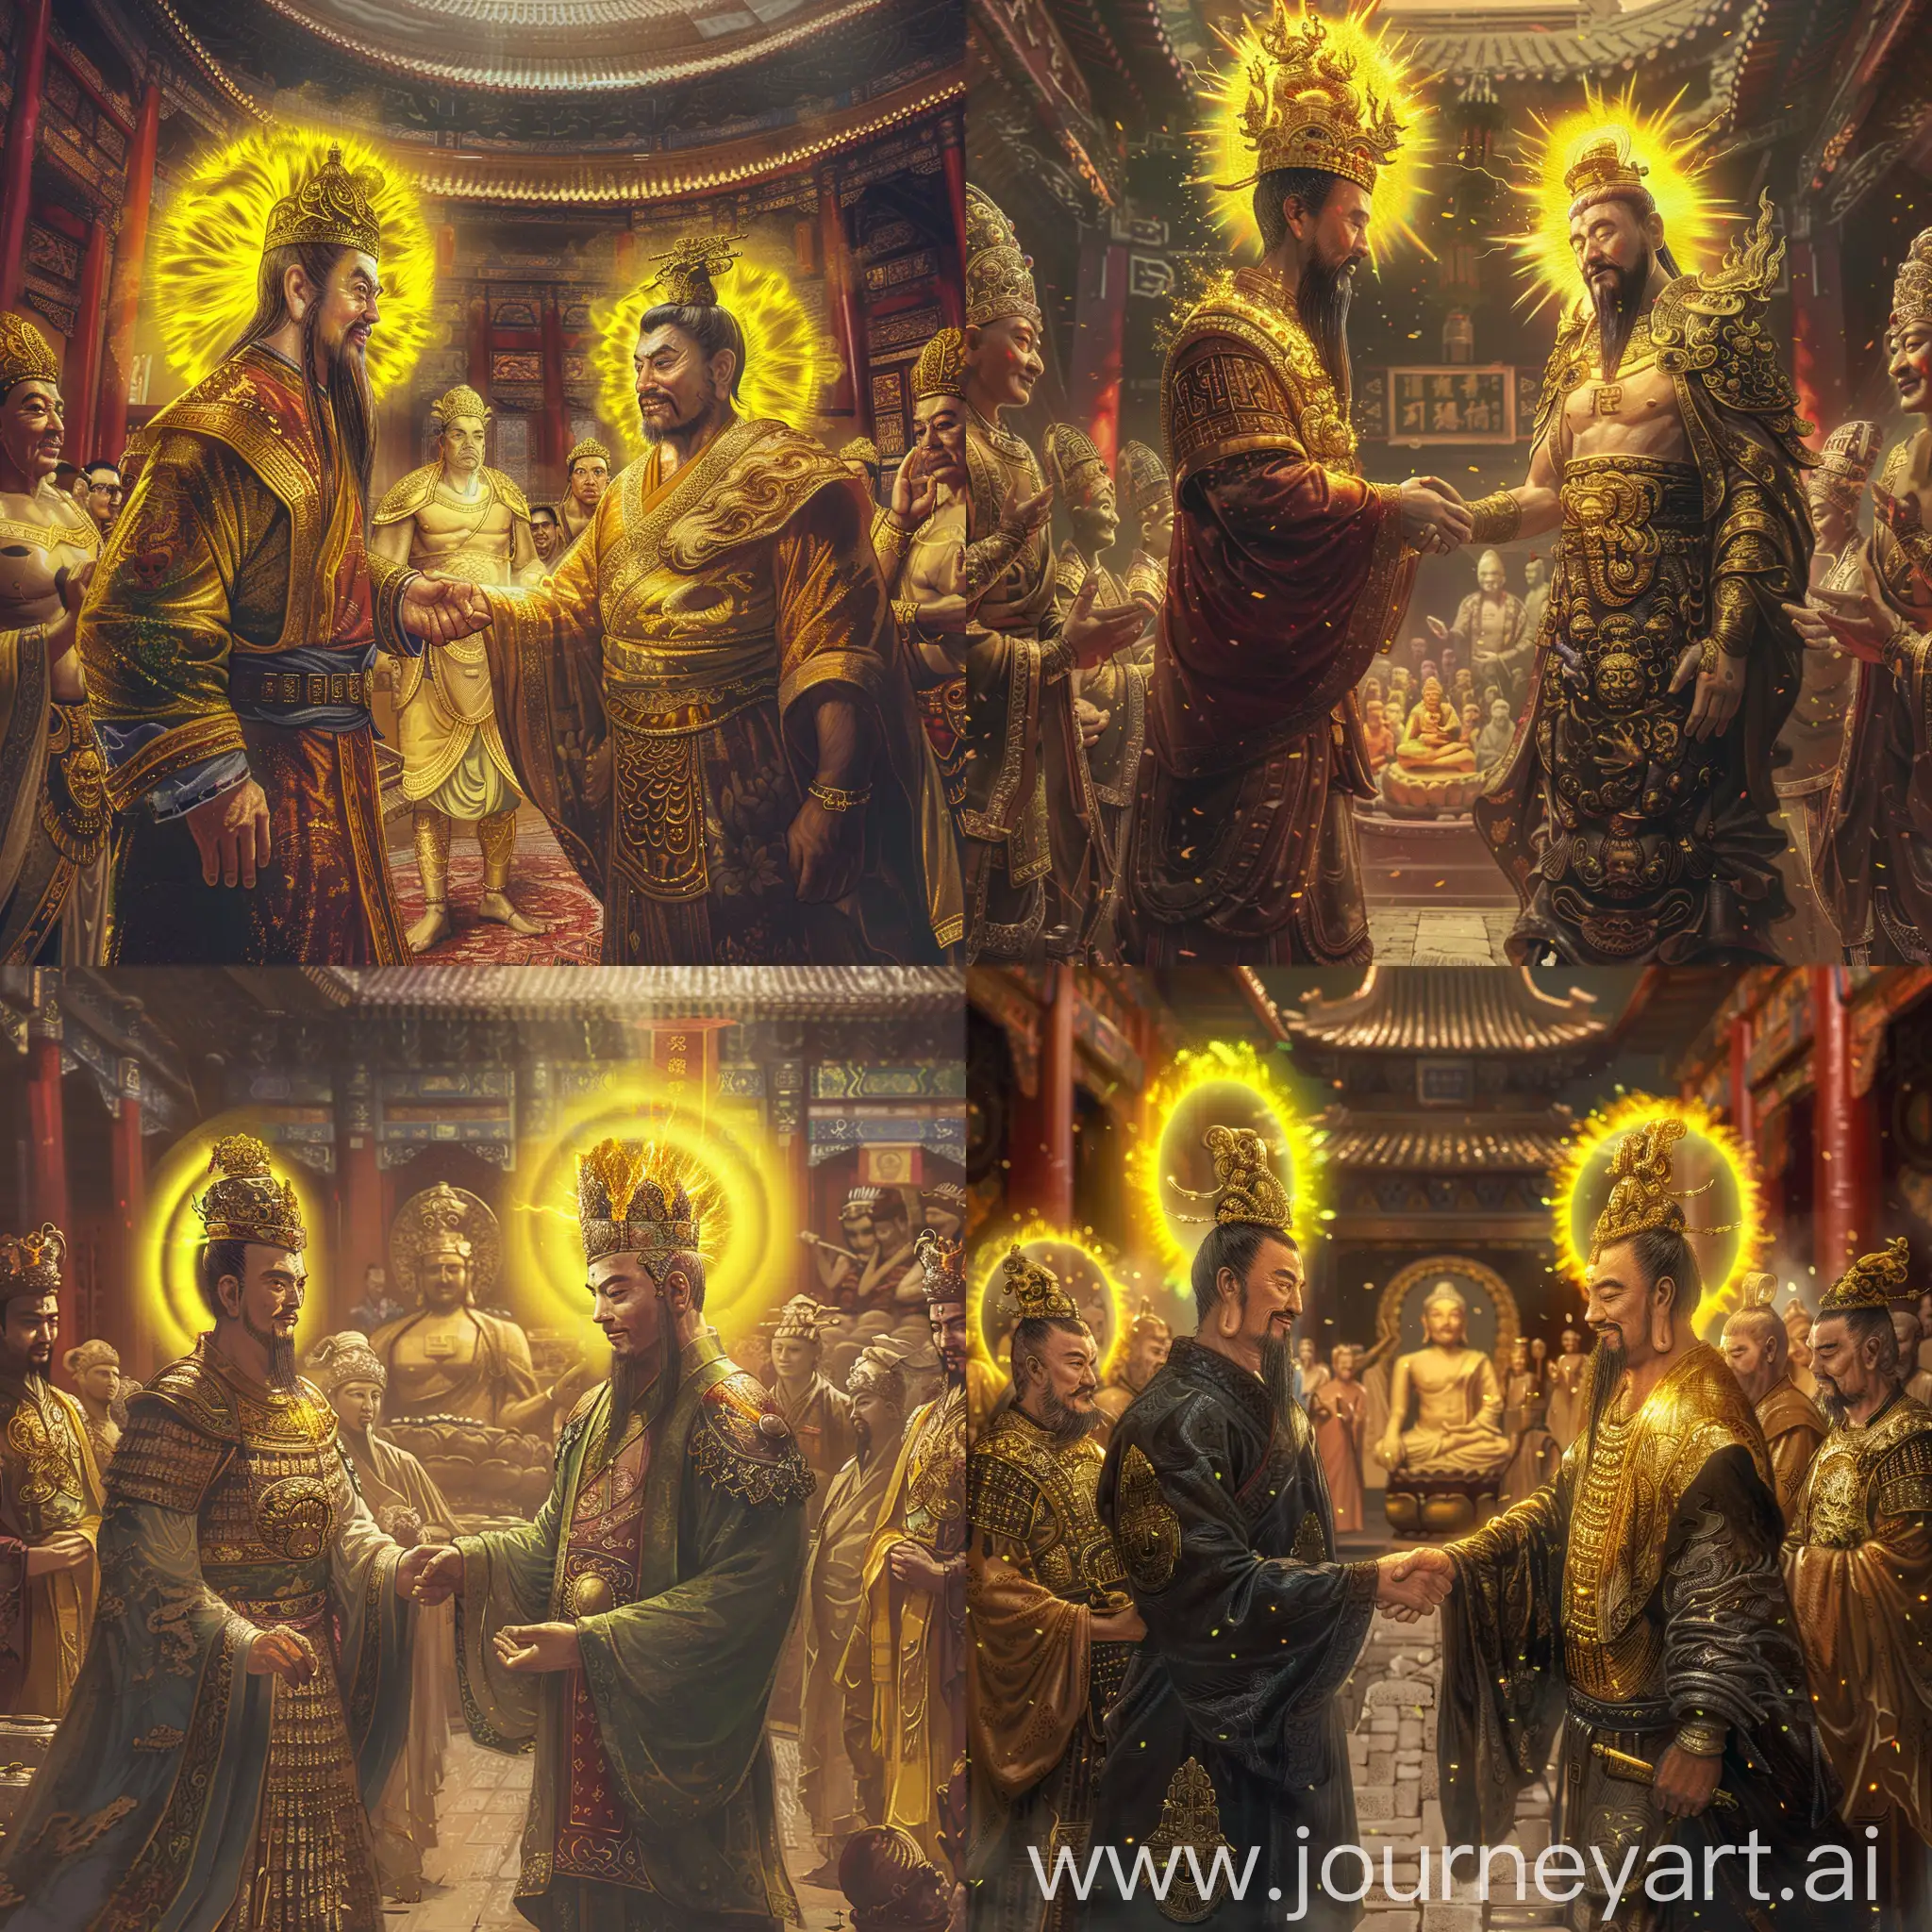 Chinese Qin dynasty emperor is shaking hand with a golden Buddha, both have yellow aurora around their heads. inside a ancient Chinese Palace with other medieval Chinese gods and other Buddhas, during a banquet